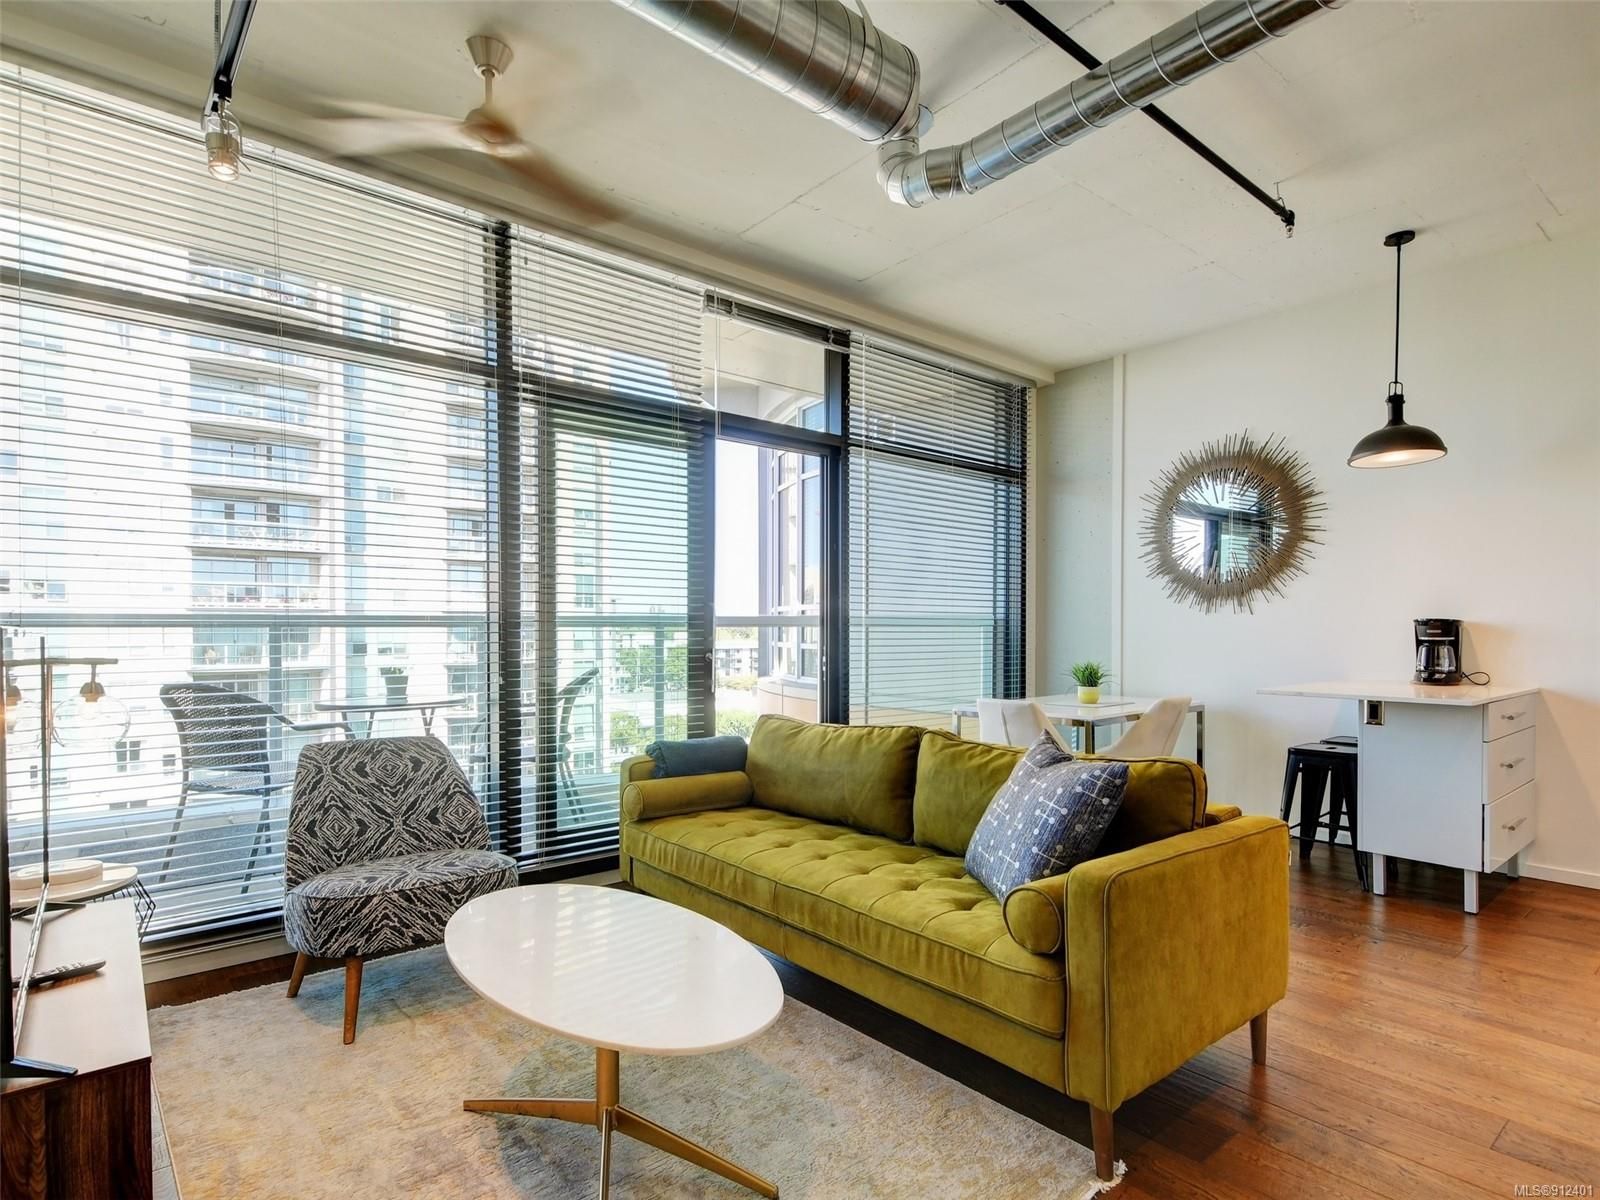 The whole width of the condo boasts Floor to Ceiling windows with access to a 38' wide balcony. New sofa flips to a queen bed..perfect for guests